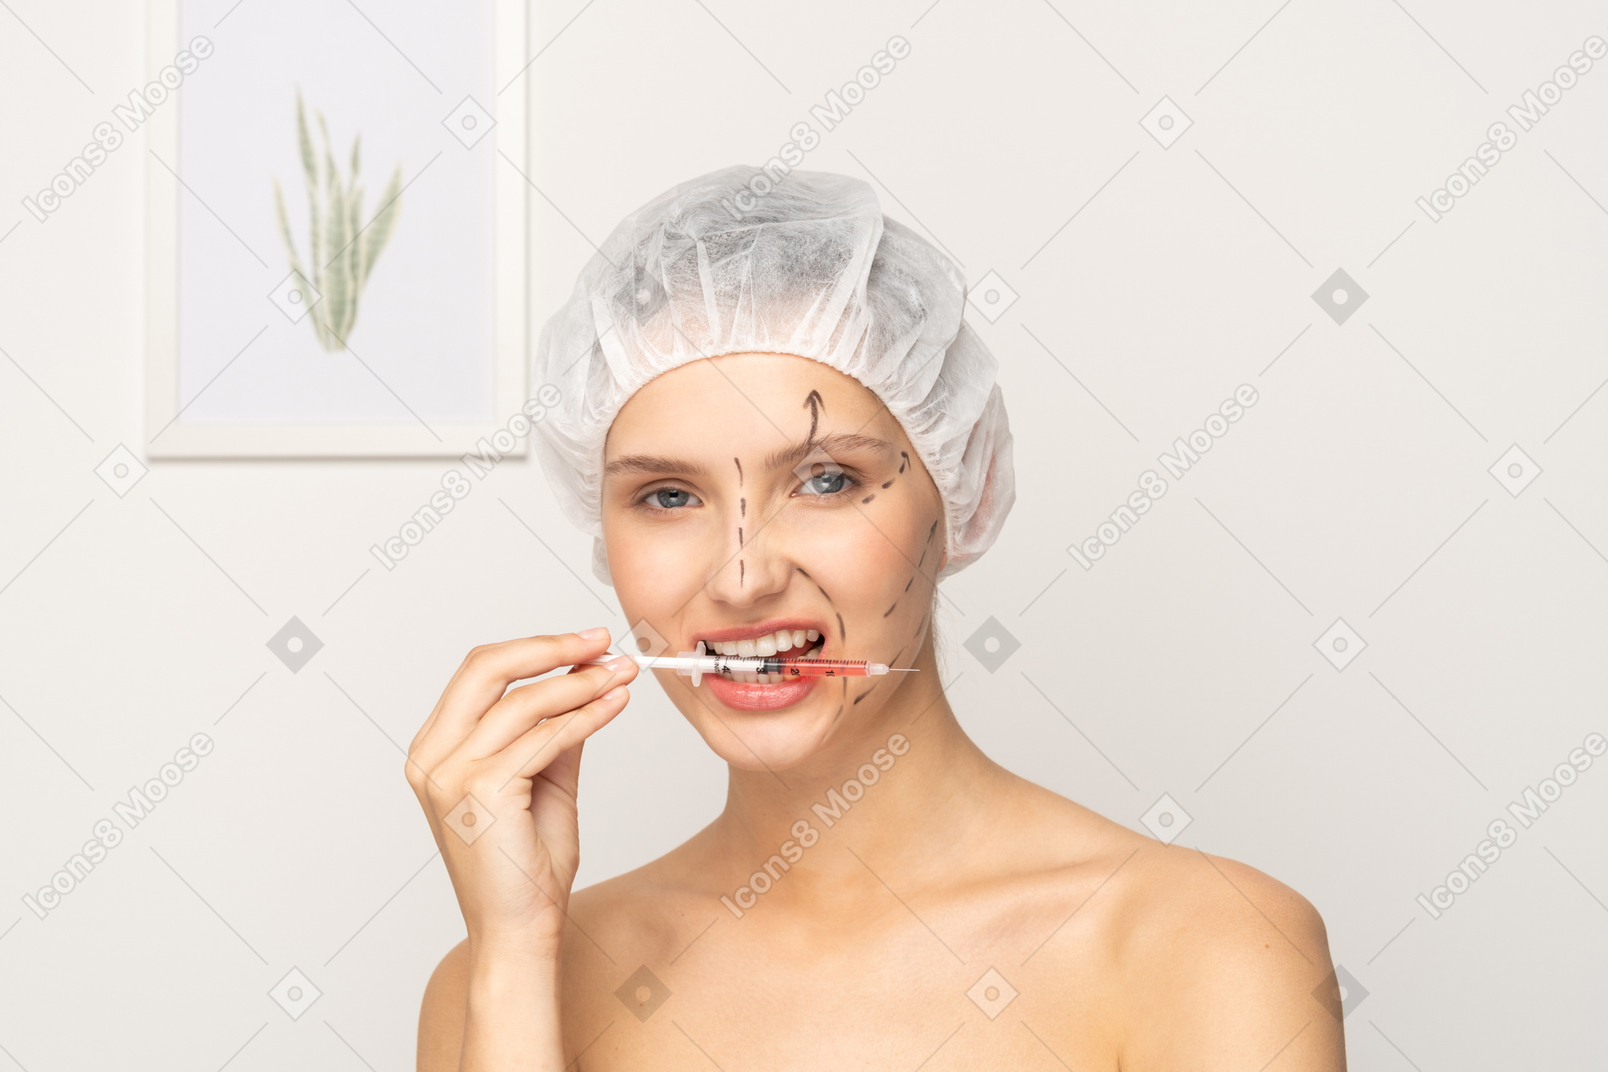 Young woman putting syringe in her mouth